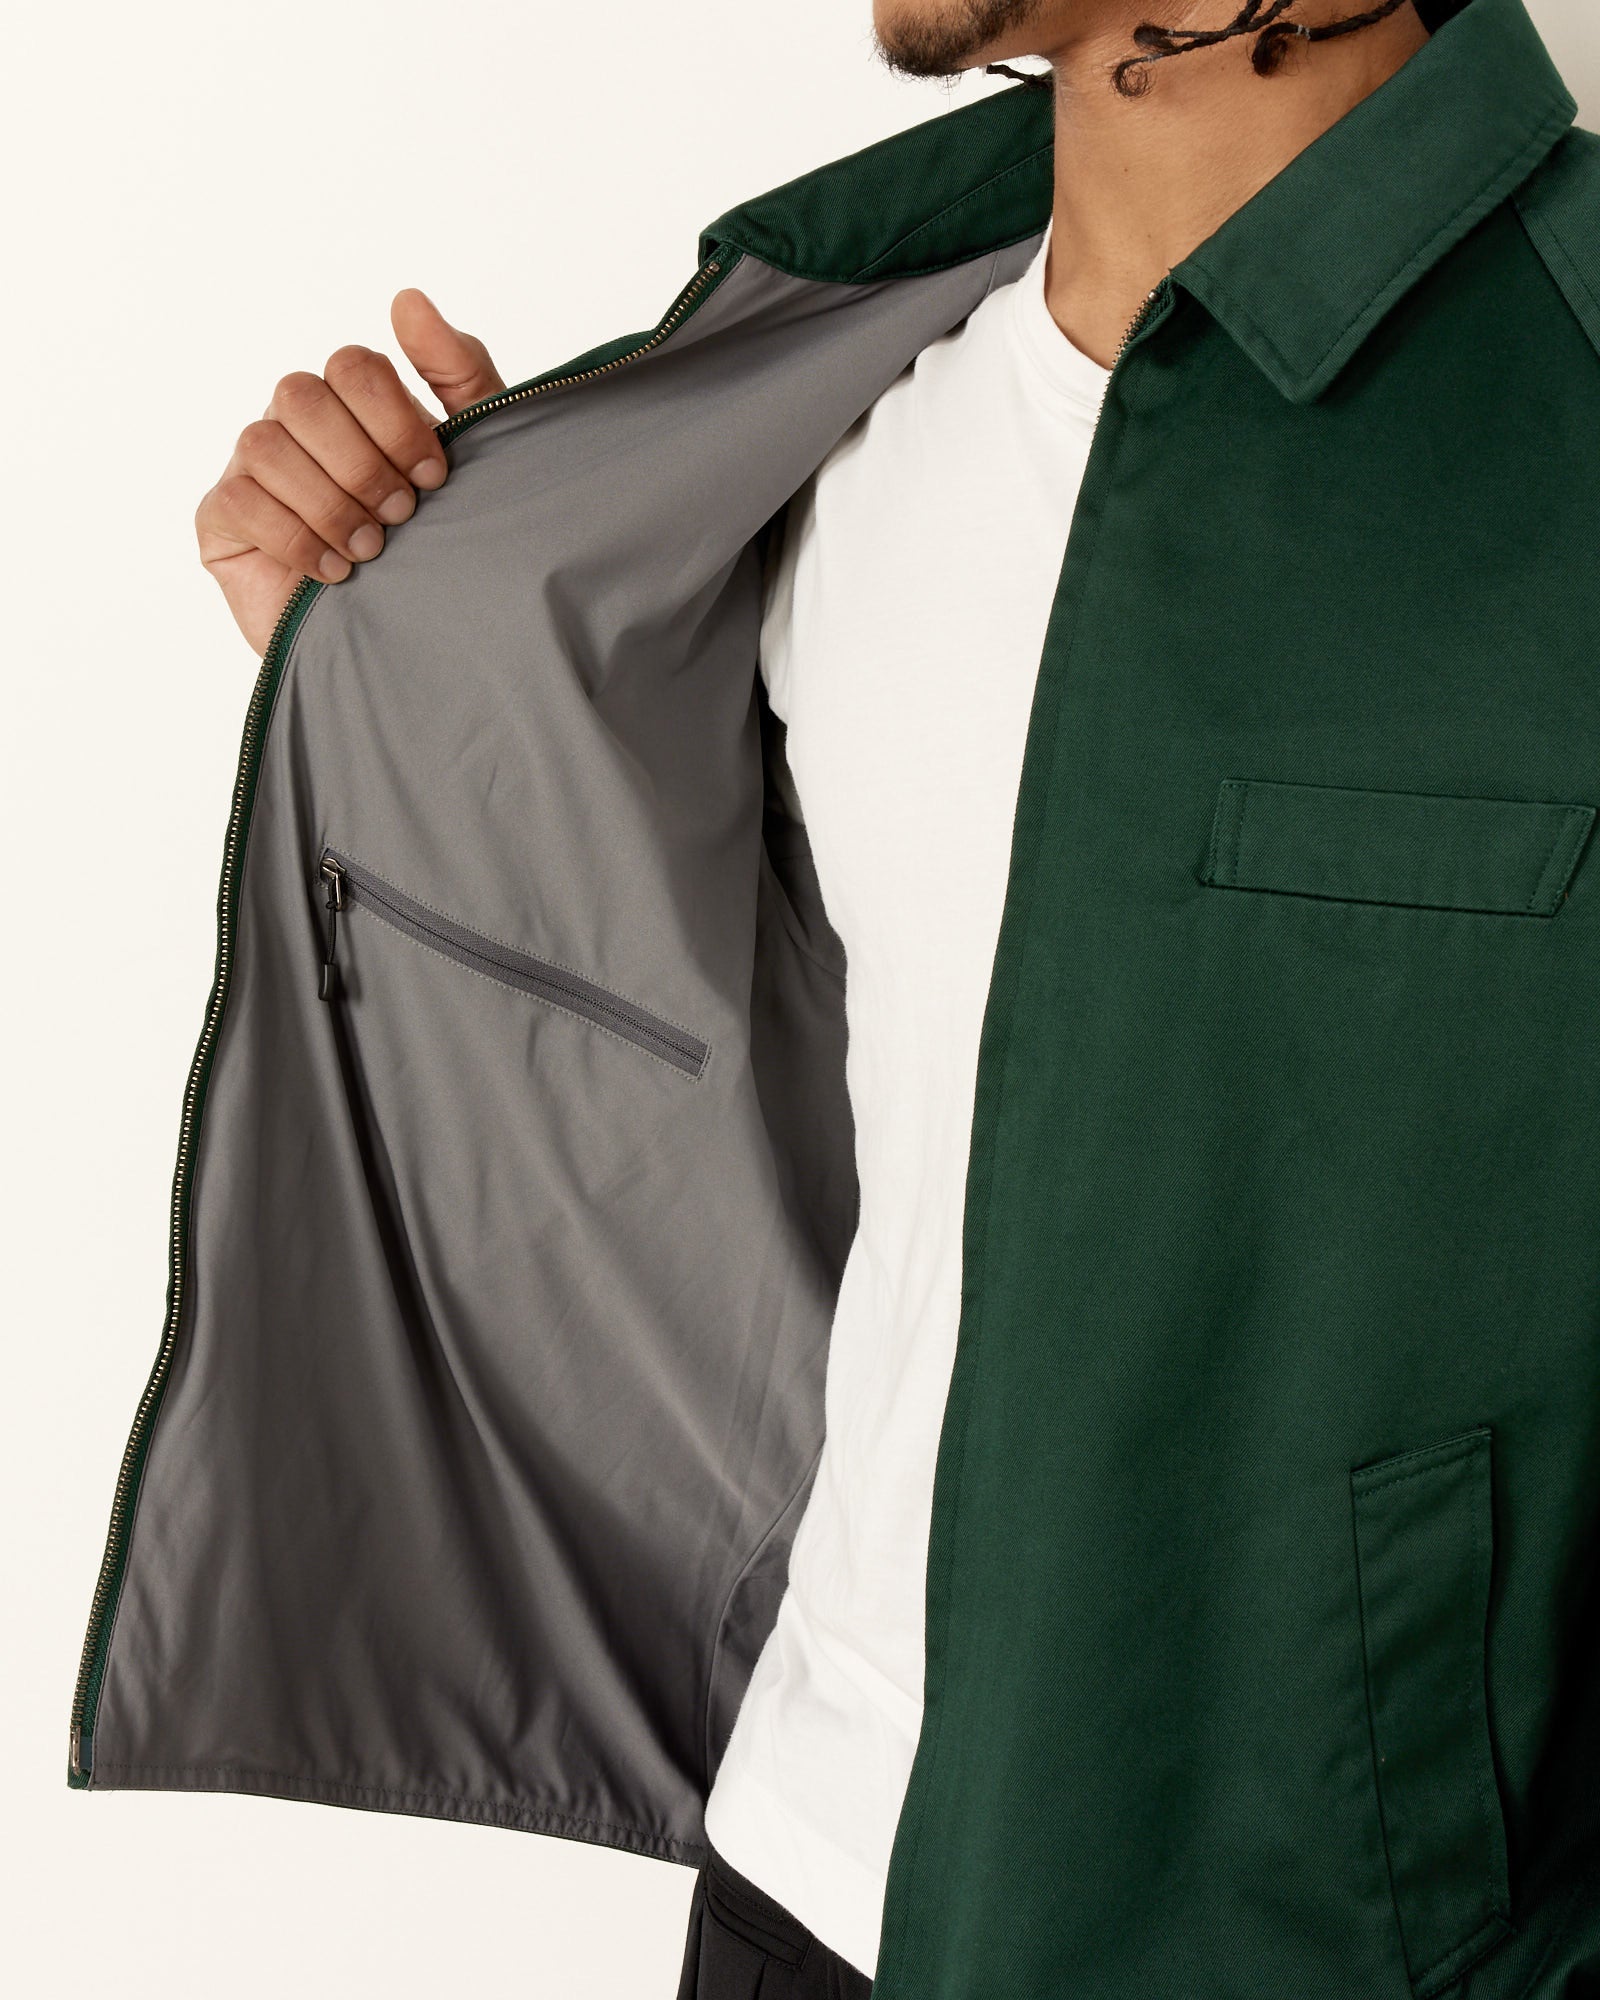 Windstopper Chino Crew Jacket in Green